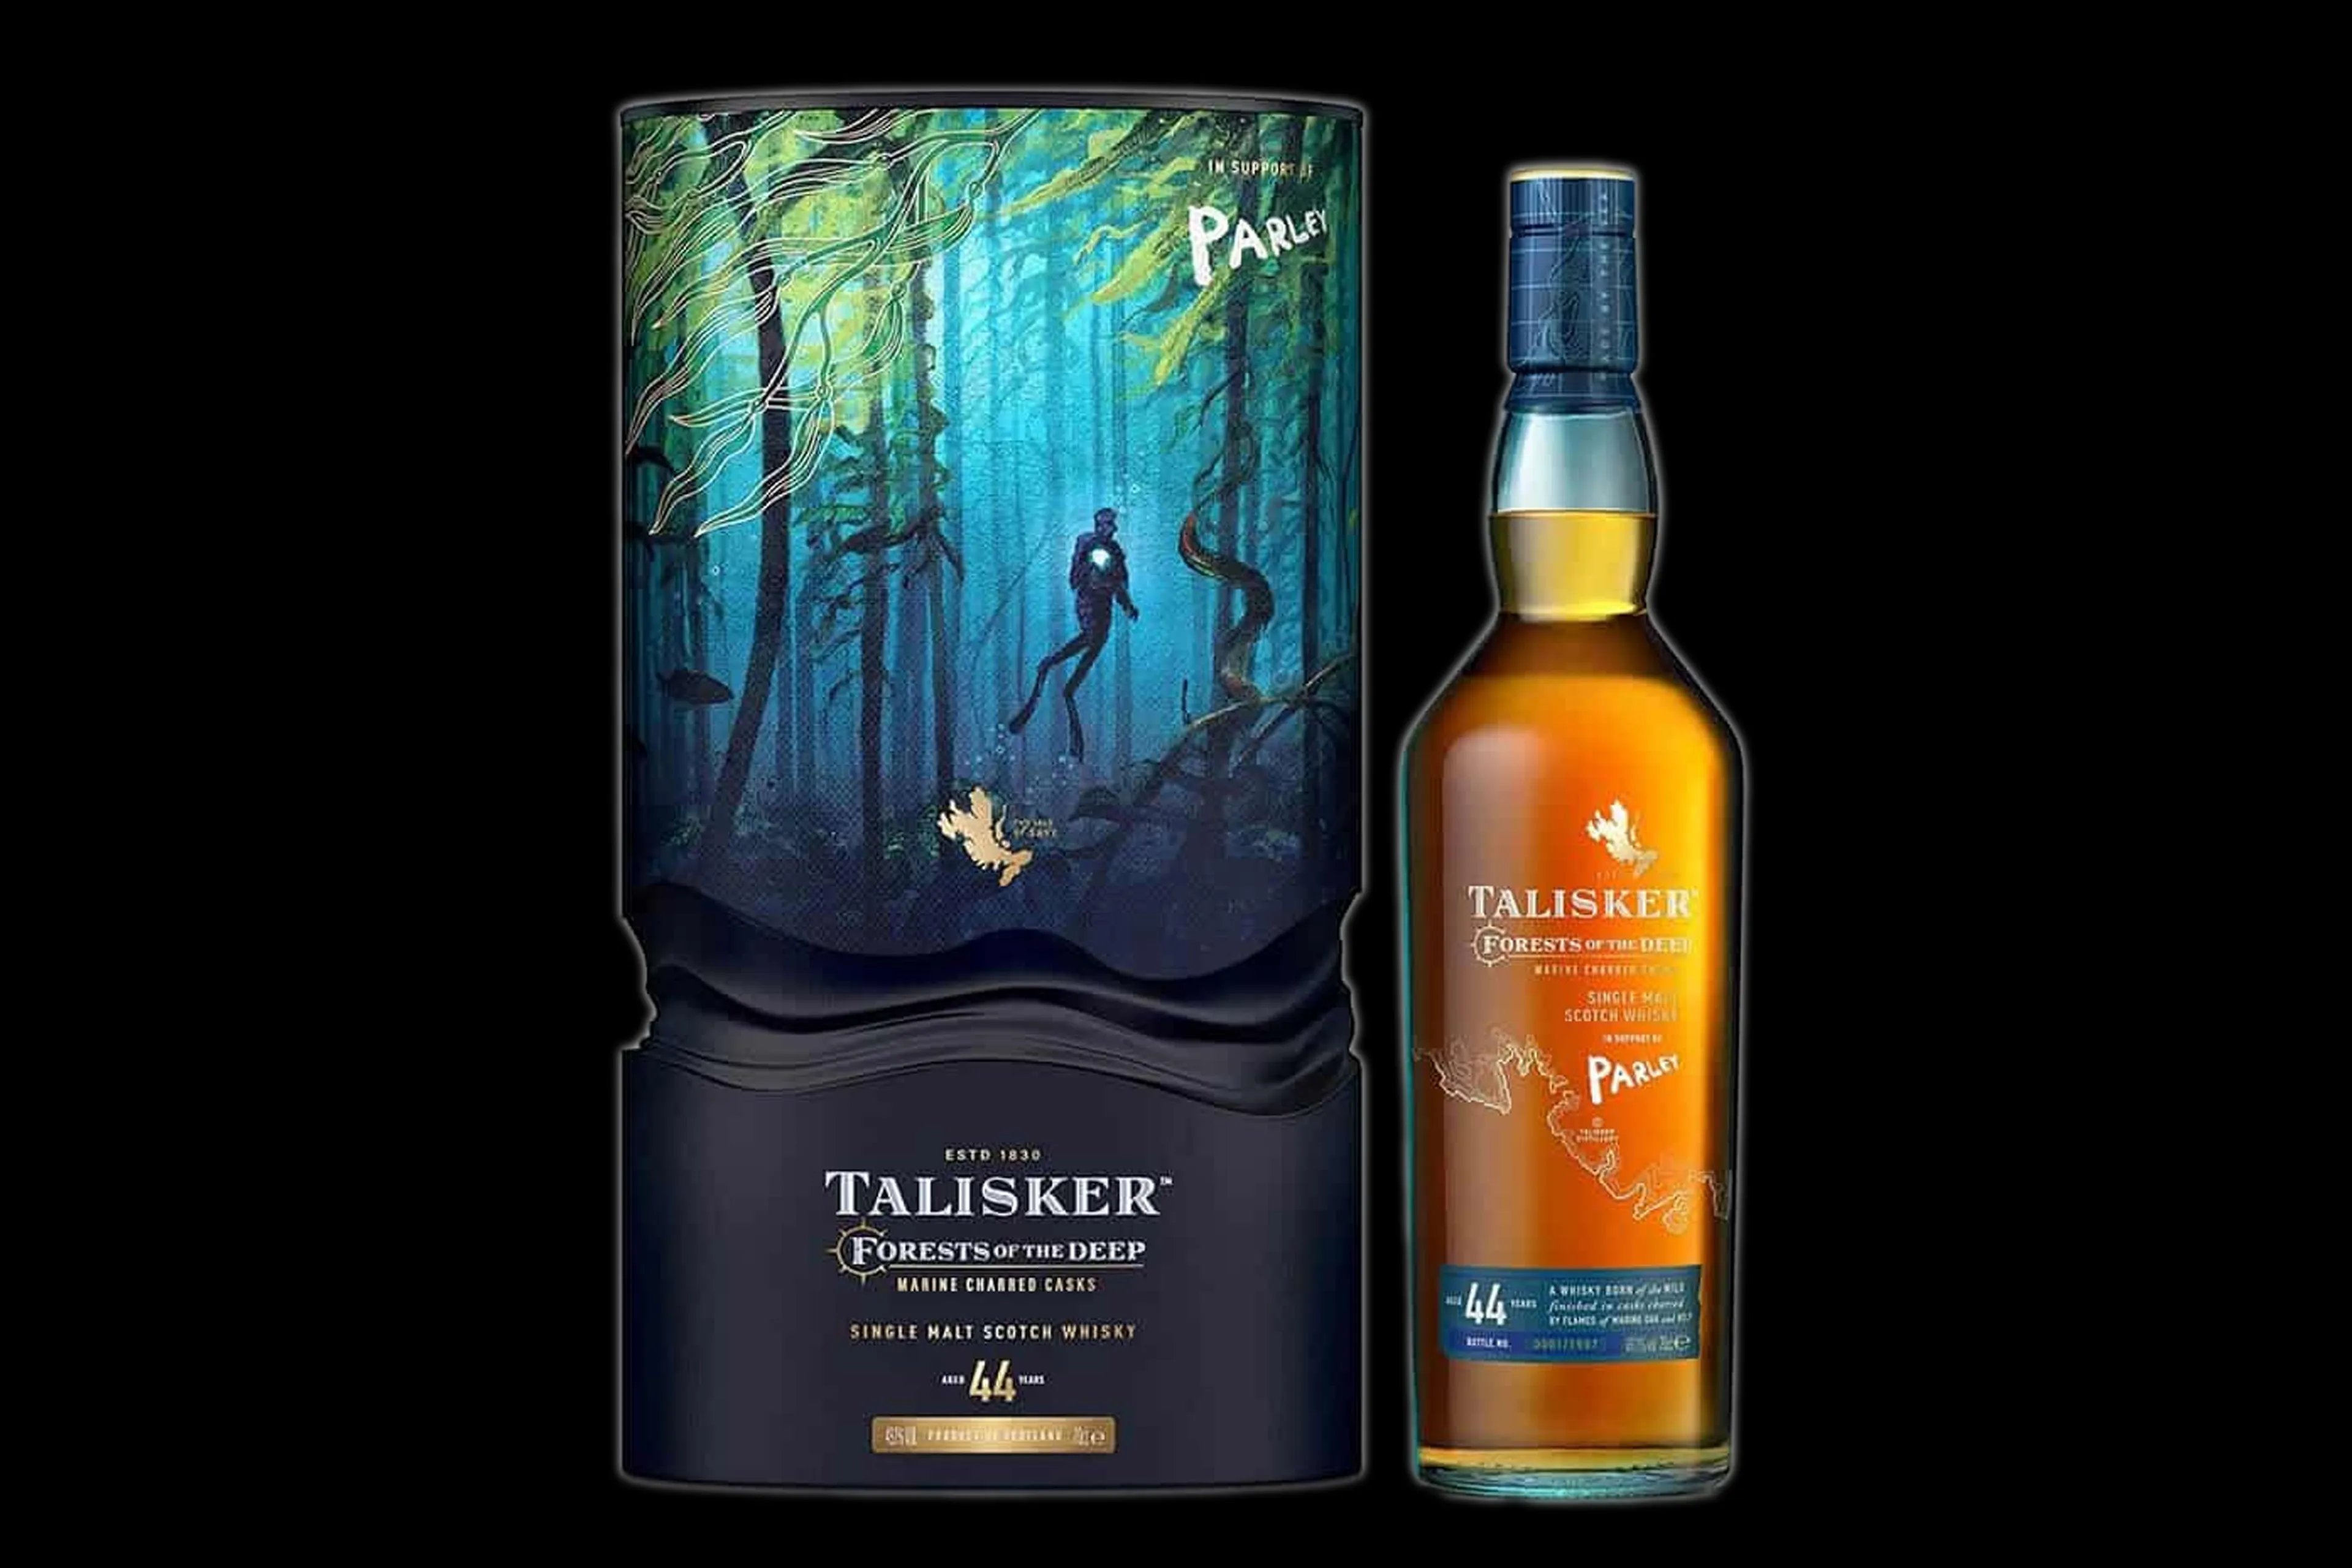 Talisker 44 Year Old: Forests of the Deep